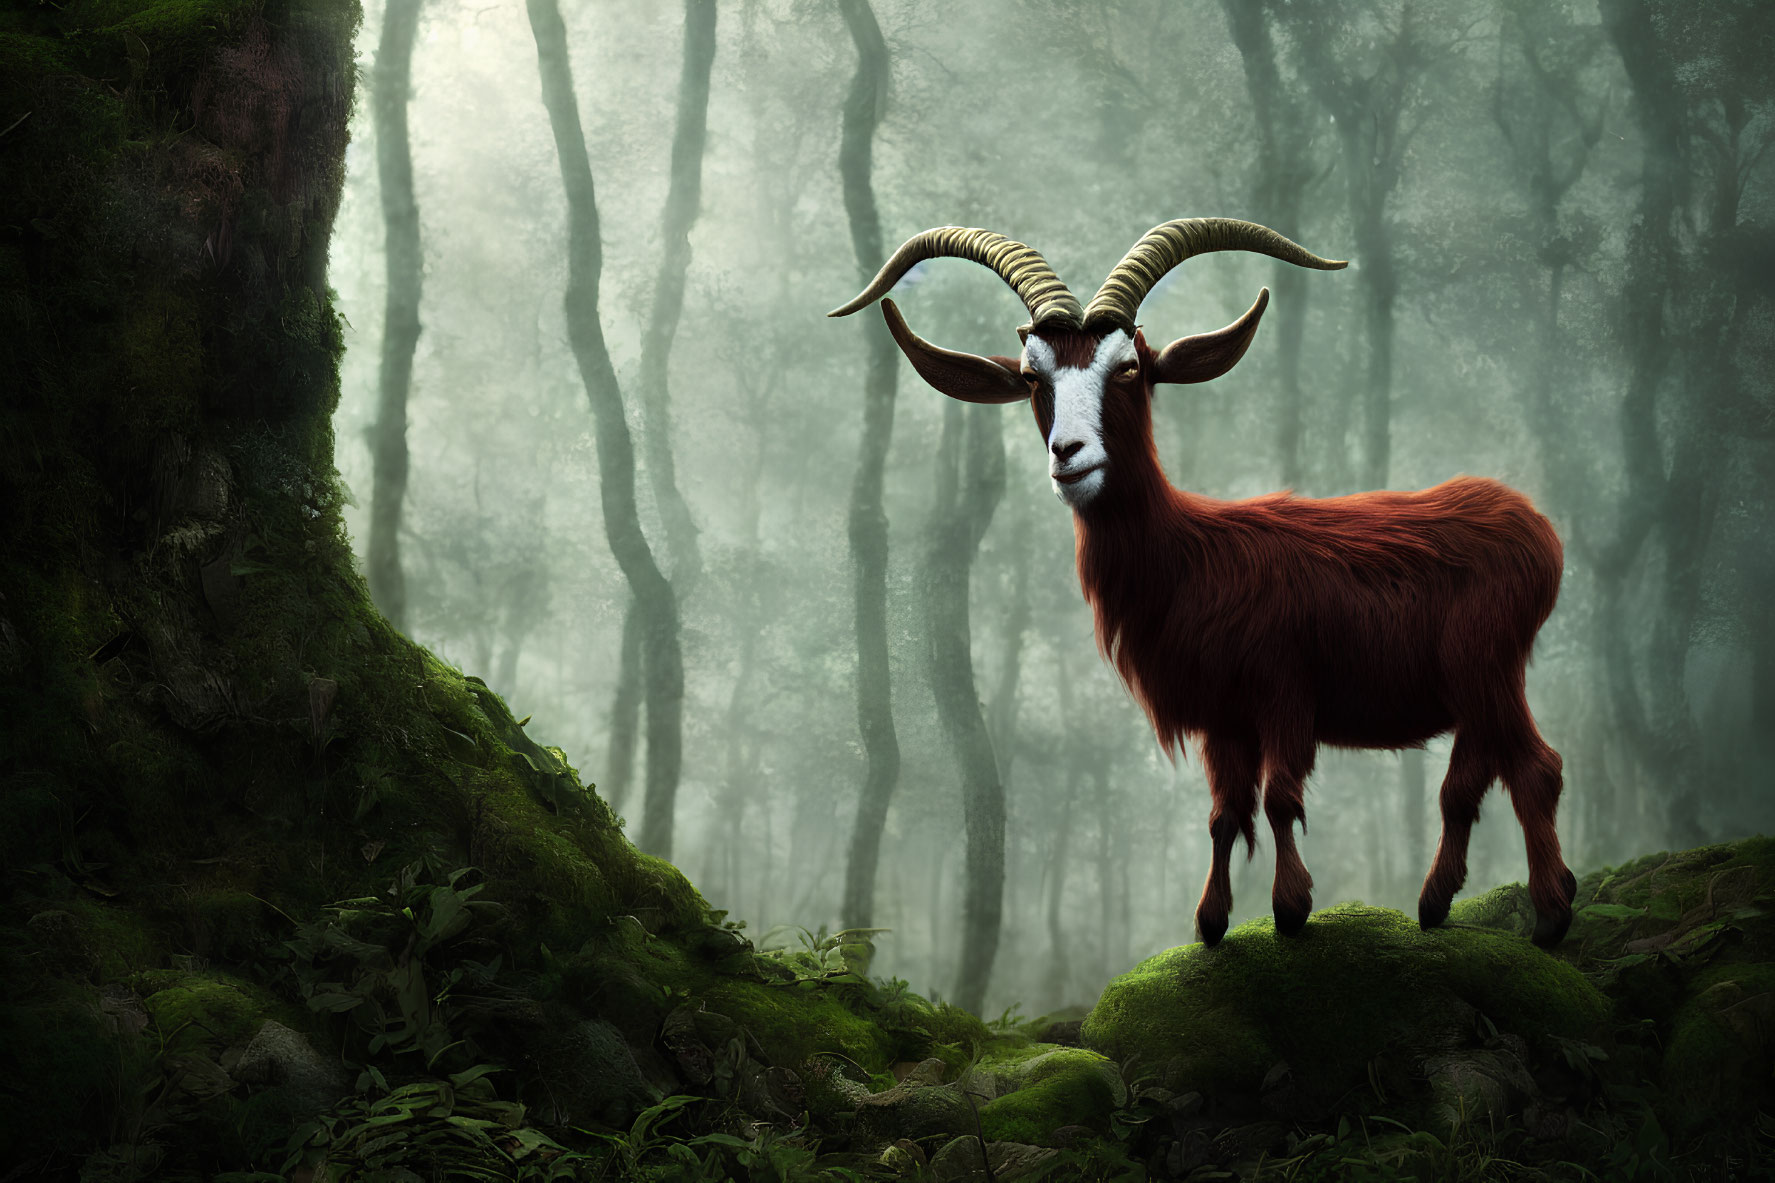 Majestic goat with curved horns in lush green forest